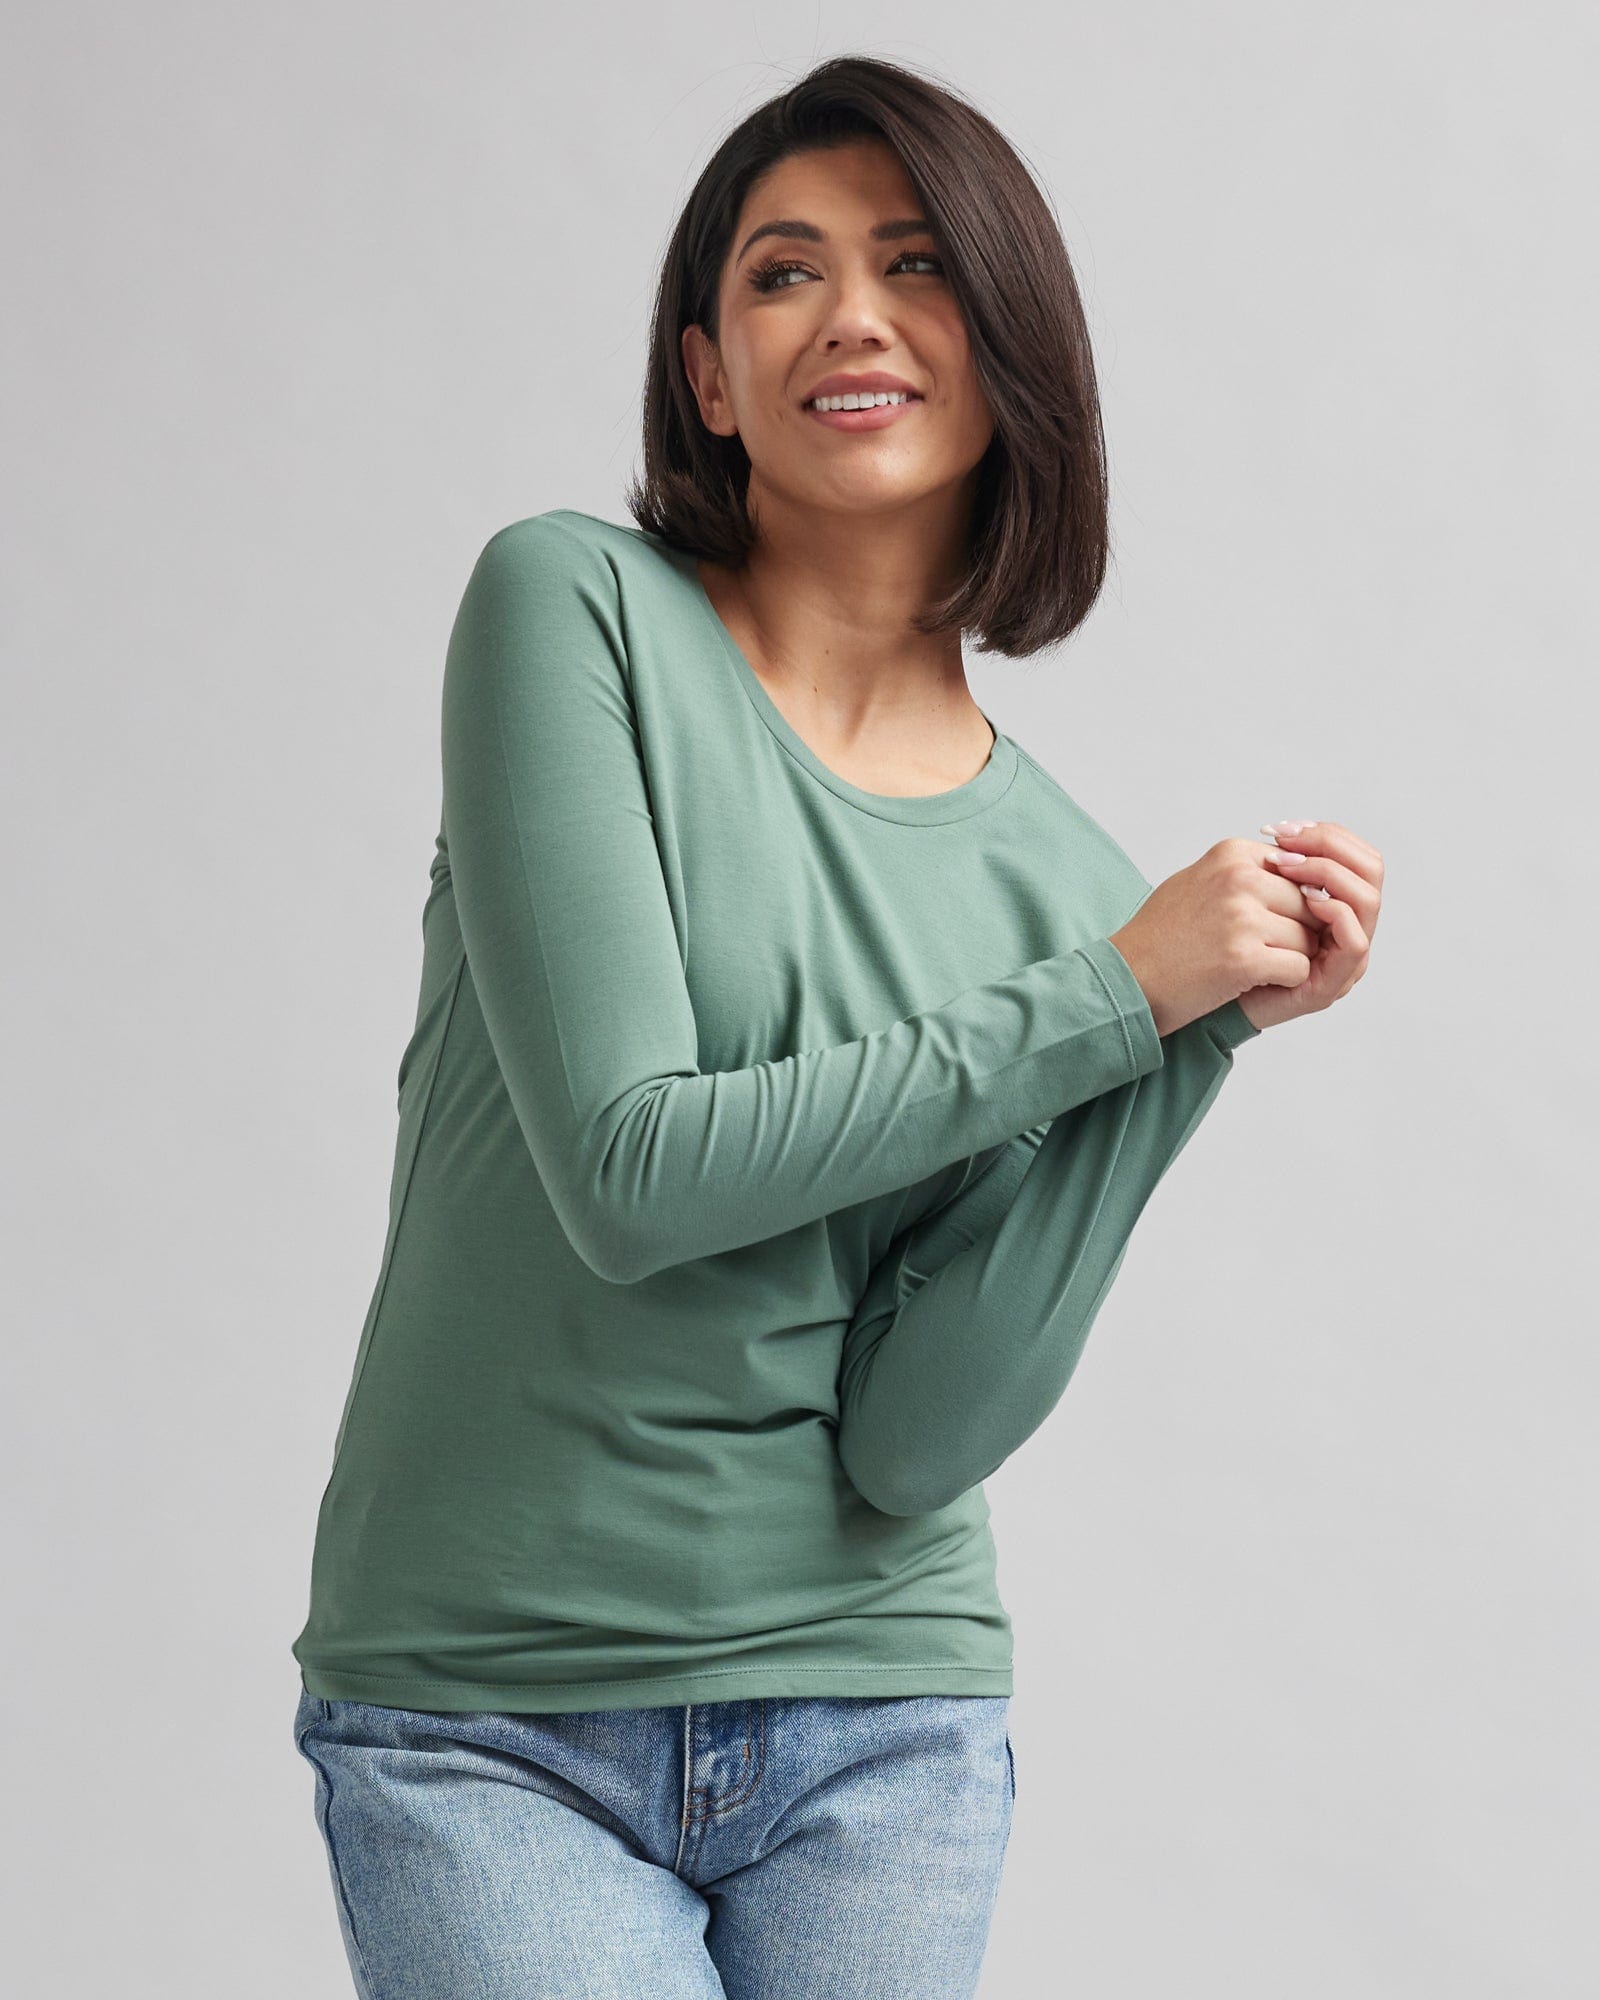 Woman in a long sleeve, semi-fitted, basic t-shirt